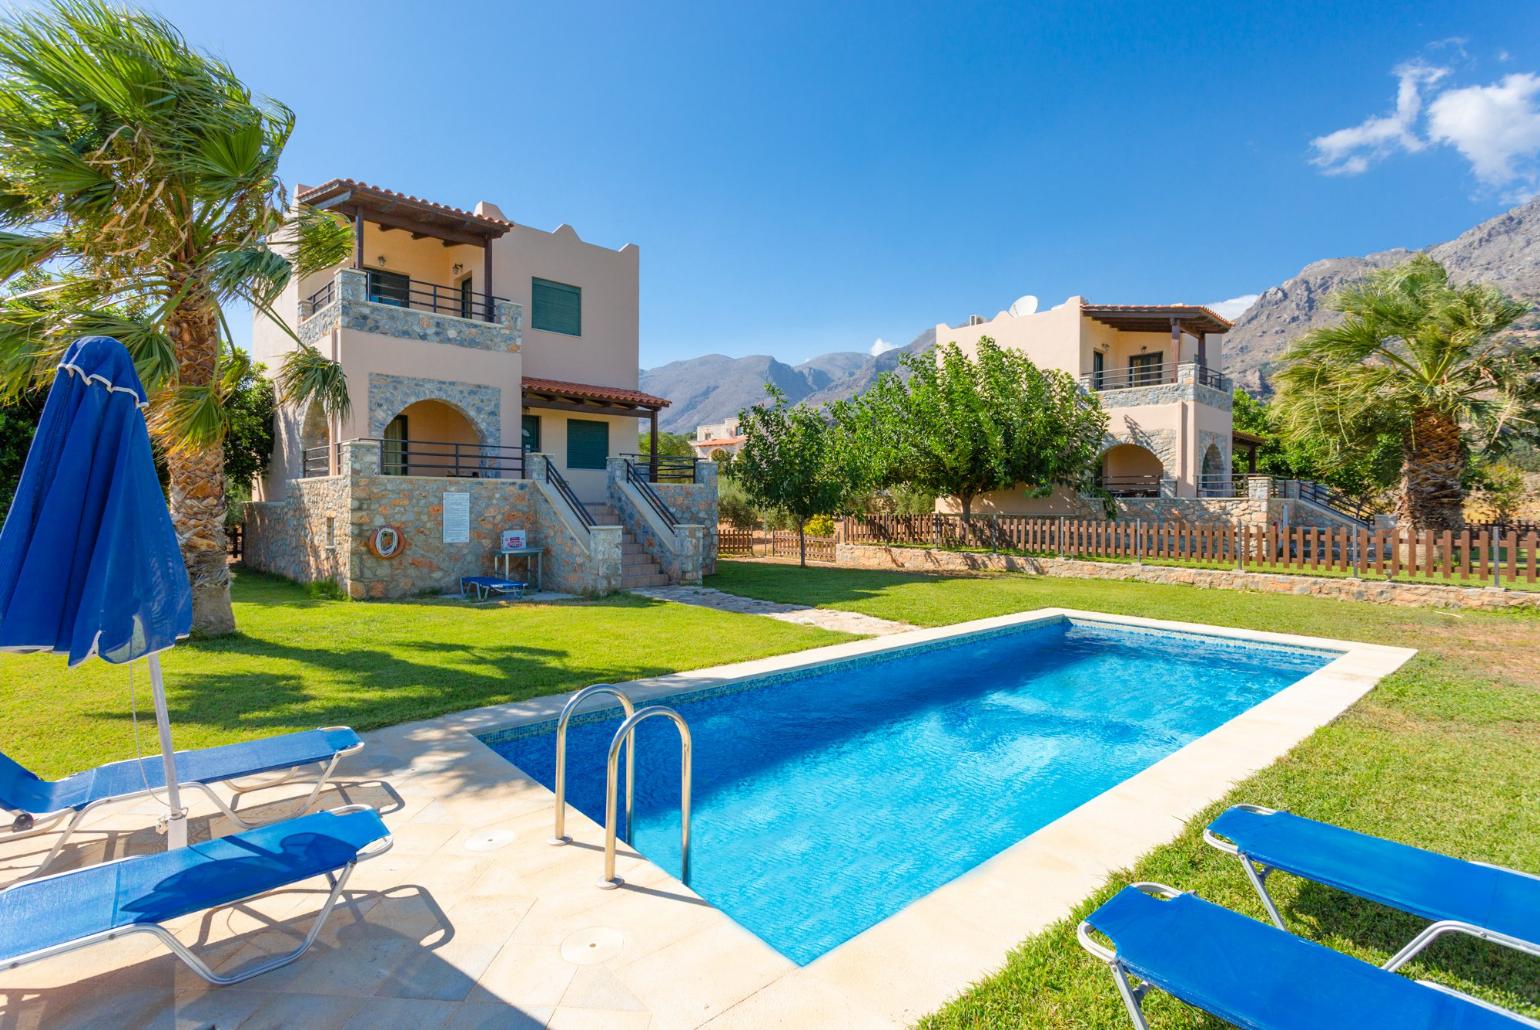 Beautiful villa with private pool, lawn, and terrace with sea views